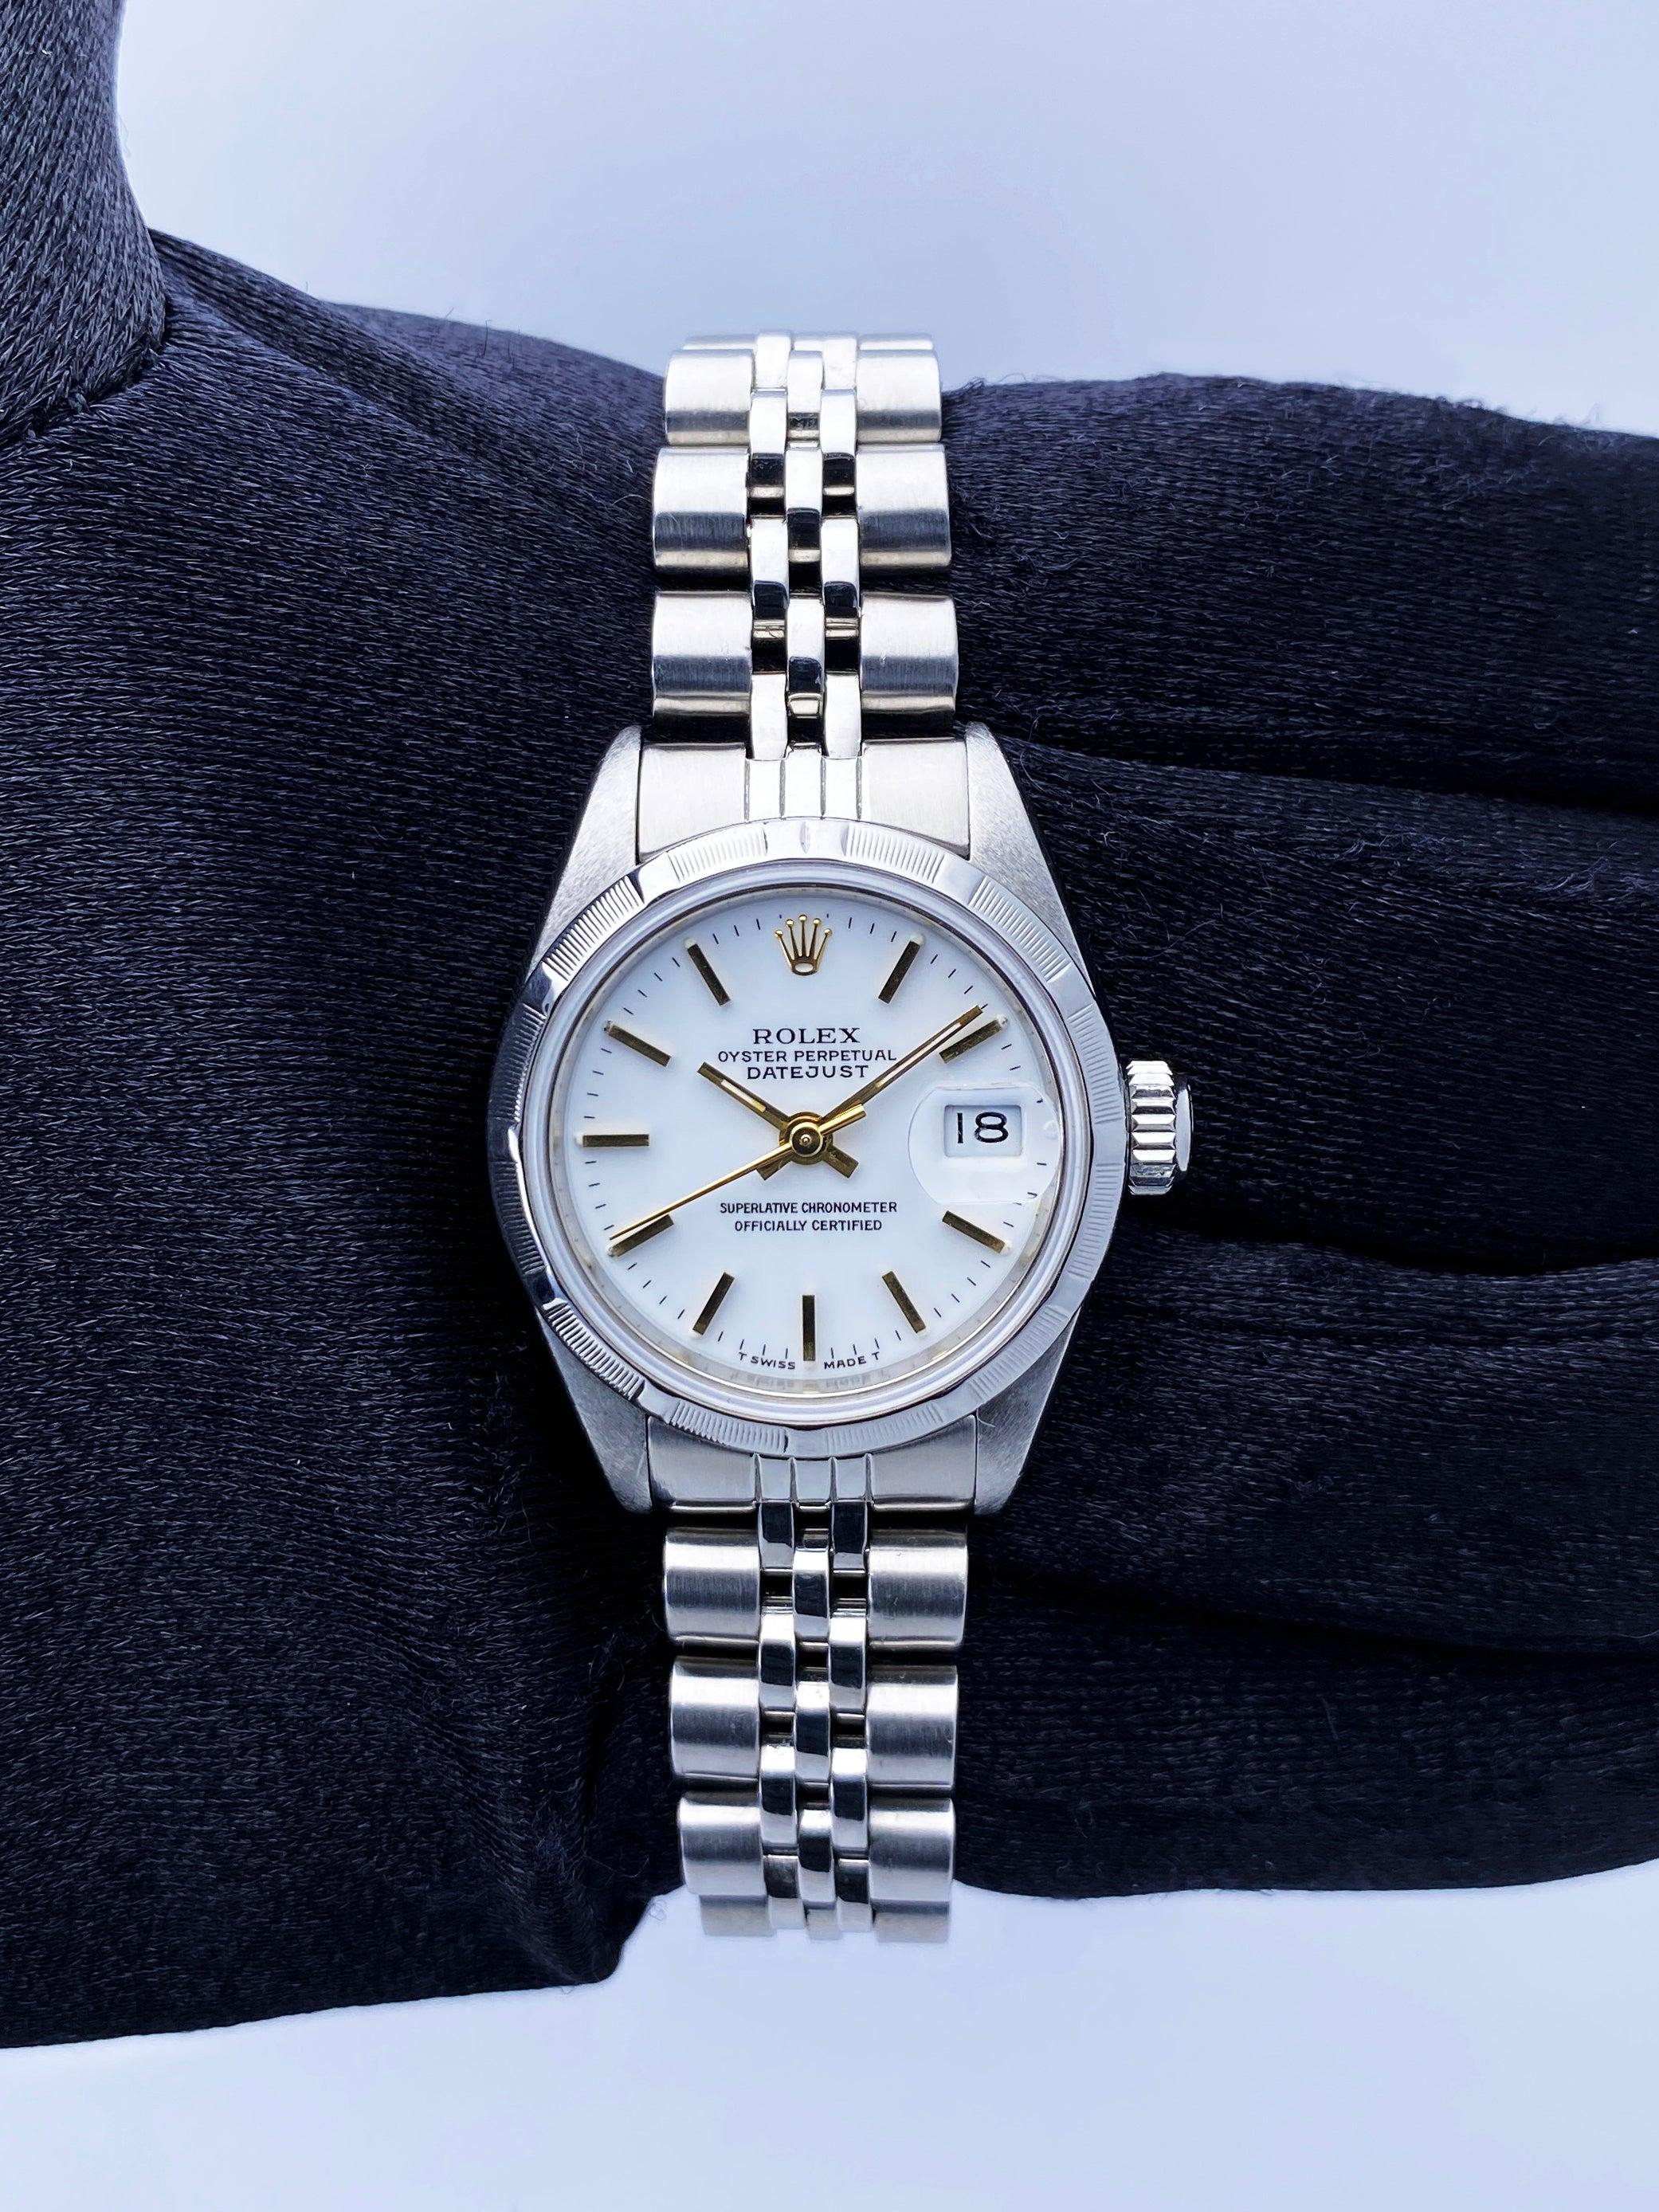 Rolex Oyster Perpetual Datejust 69190 Ladies Watch. 26mm stainless steel case with stainless steel bezel. White dial with gold hands and gold index hour marker. Quickset date display at 3 o'clock position. Stainless steel Jubilee bracelet with fold